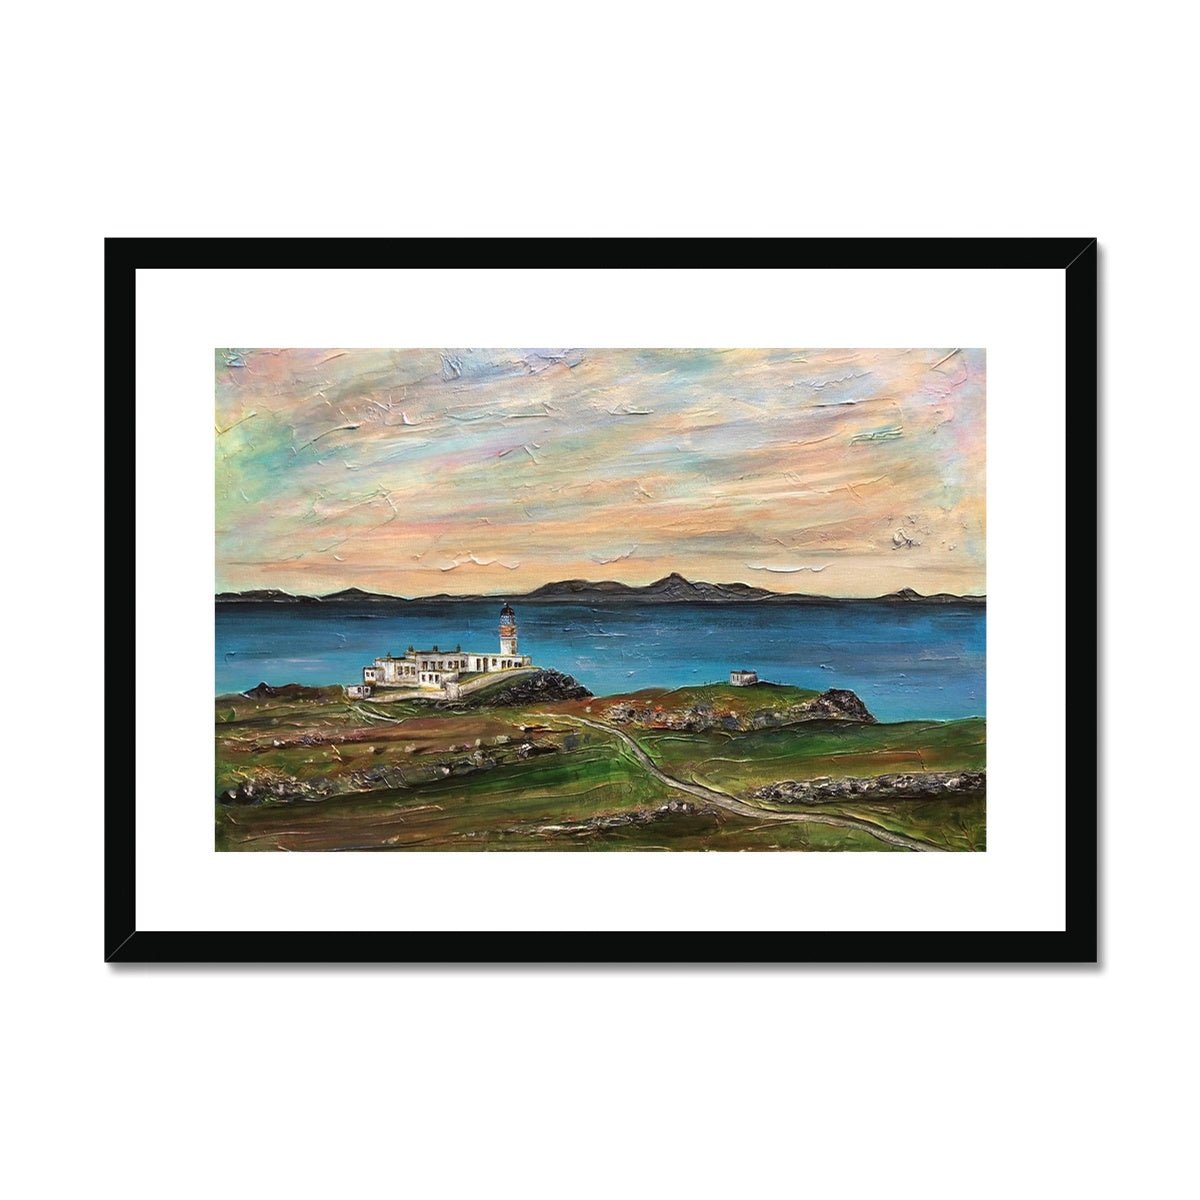 Neist Point Skye Painting | Framed & Mounted Prints From Scotland-Framed & Mounted Prints-Skye Art Gallery-A2 Landscape-Black Frame-Paintings, Prints, Homeware, Art Gifts From Scotland By Scottish Artist Kevin Hunter